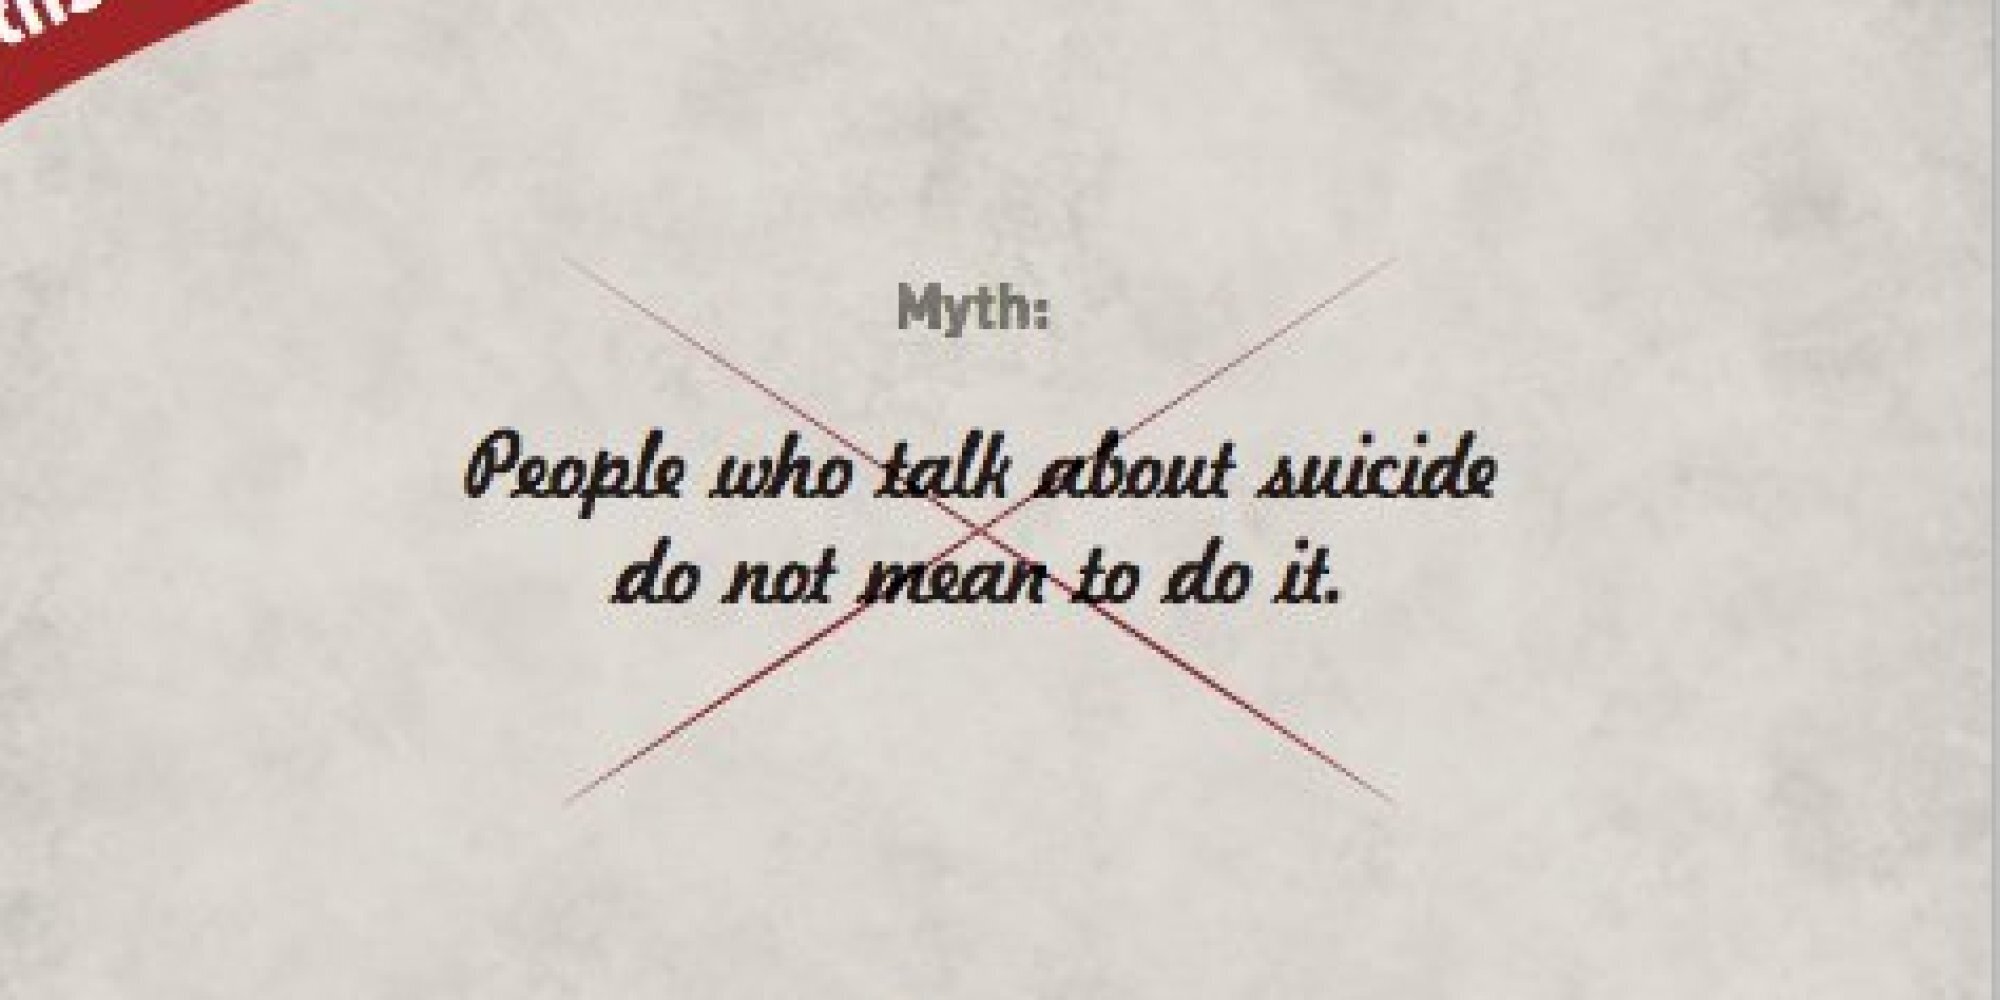 Myths About Suicide by Thomas E. Joiner